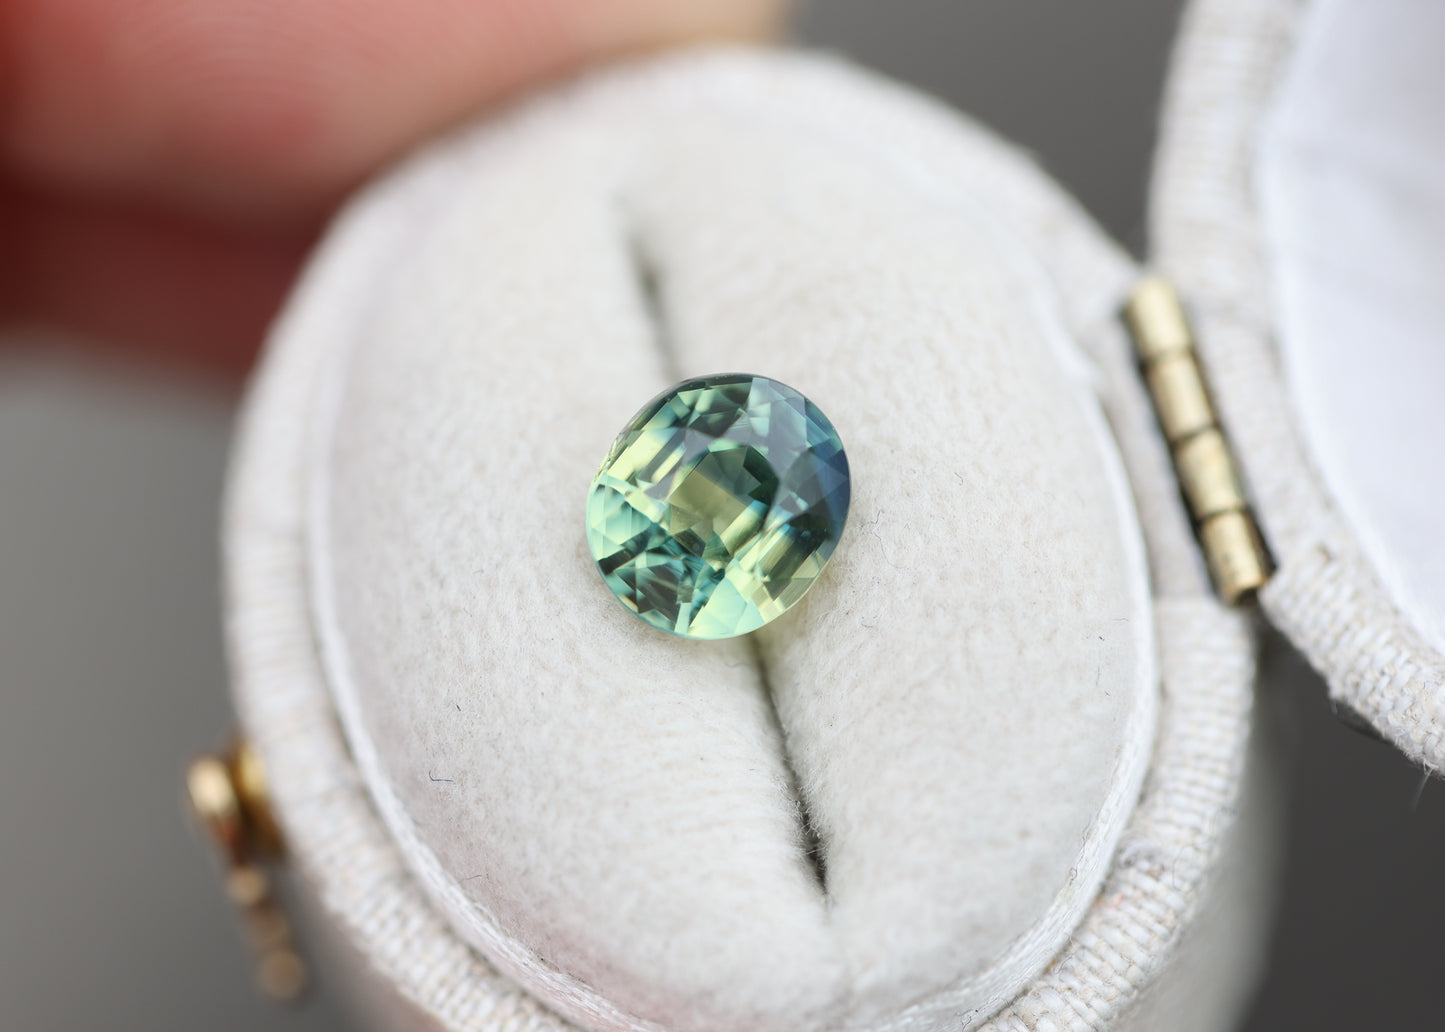 2.14ct oval parti teal green sapphire